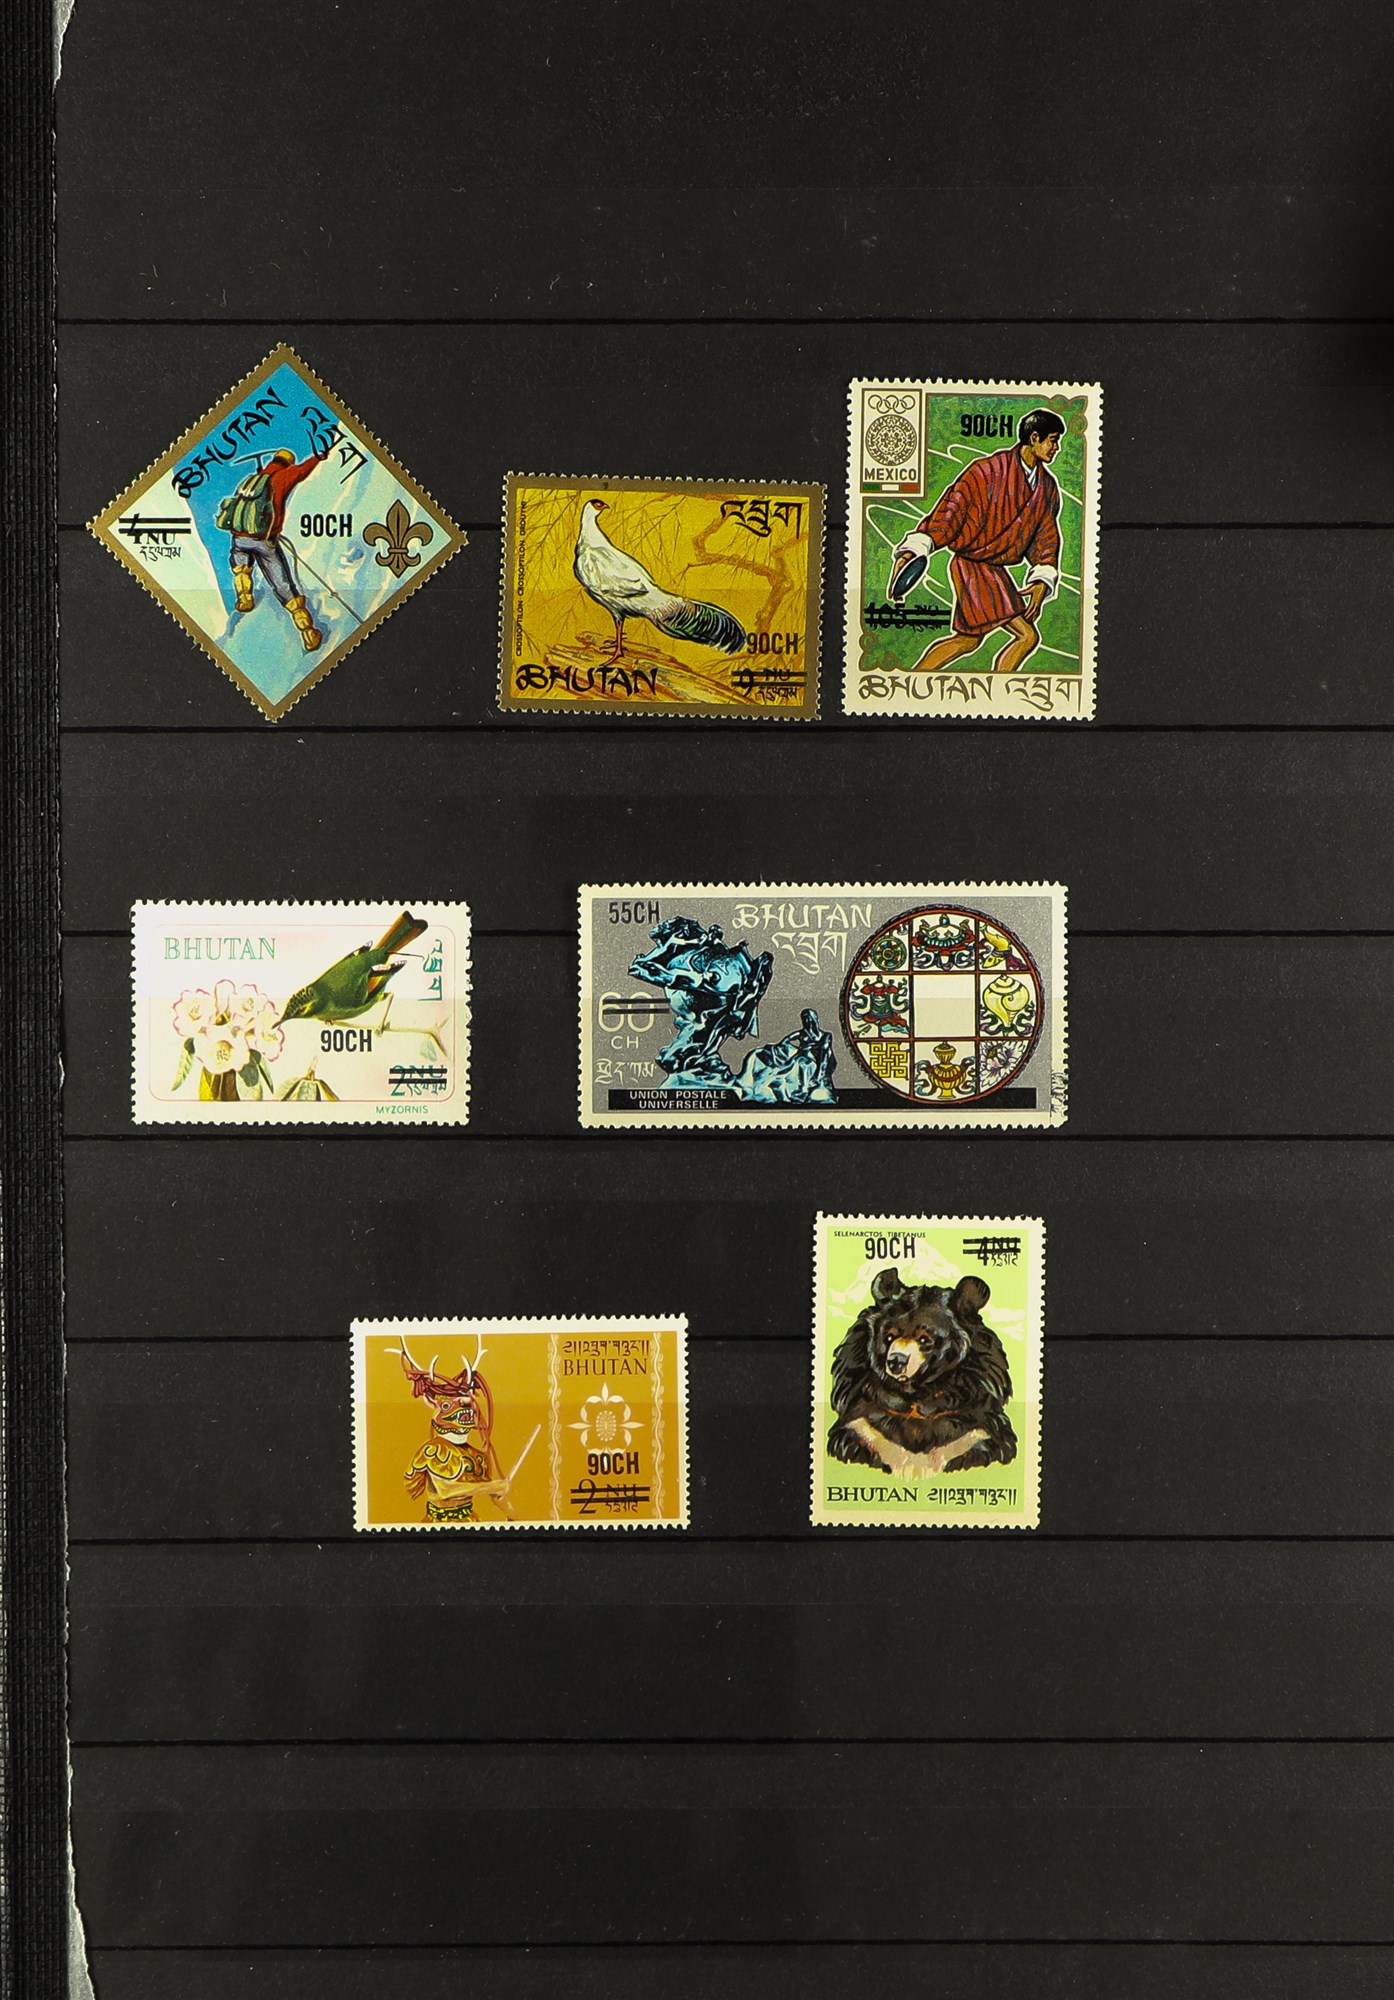 BHUTAN 1962 - 2001 COLLECTION of never hinged mint chiefly complete sets incl gold foil, embossed, - Image 6 of 10